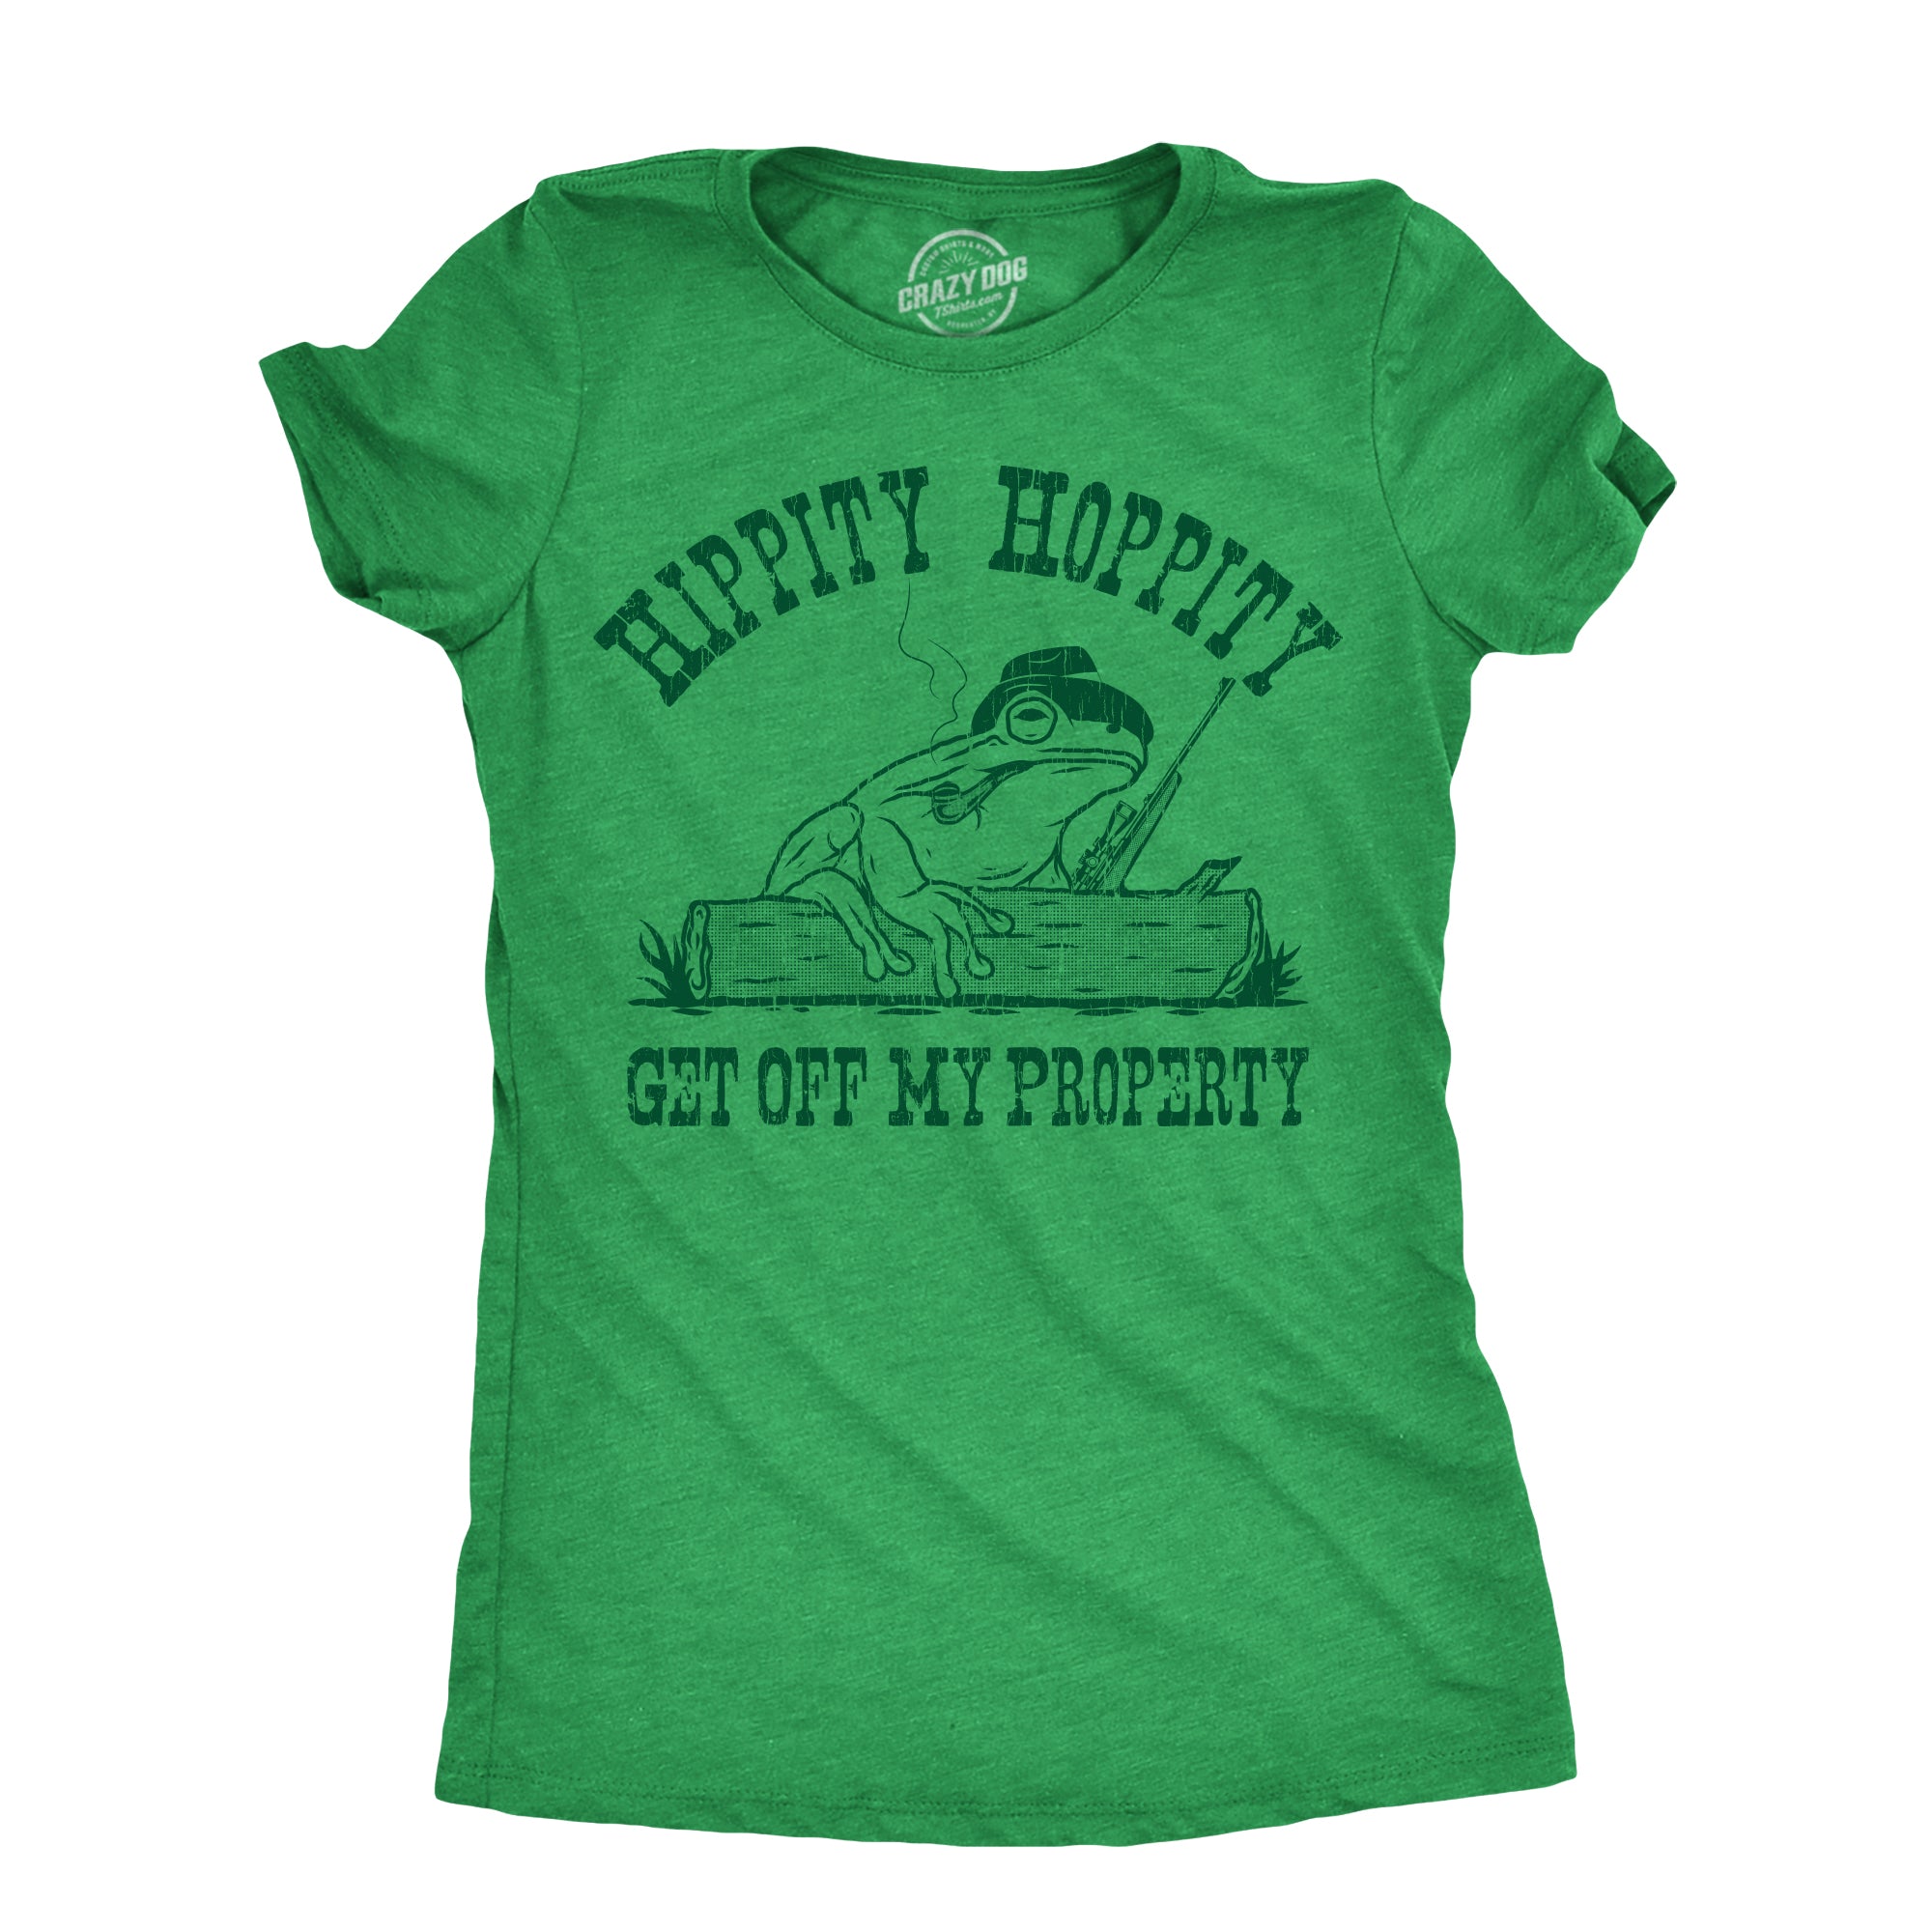 Funny Heather Green - PROPERTY Hippity Hoppity Get Off My Property Womens T Shirt Nerdy Animal sarcastic Tee